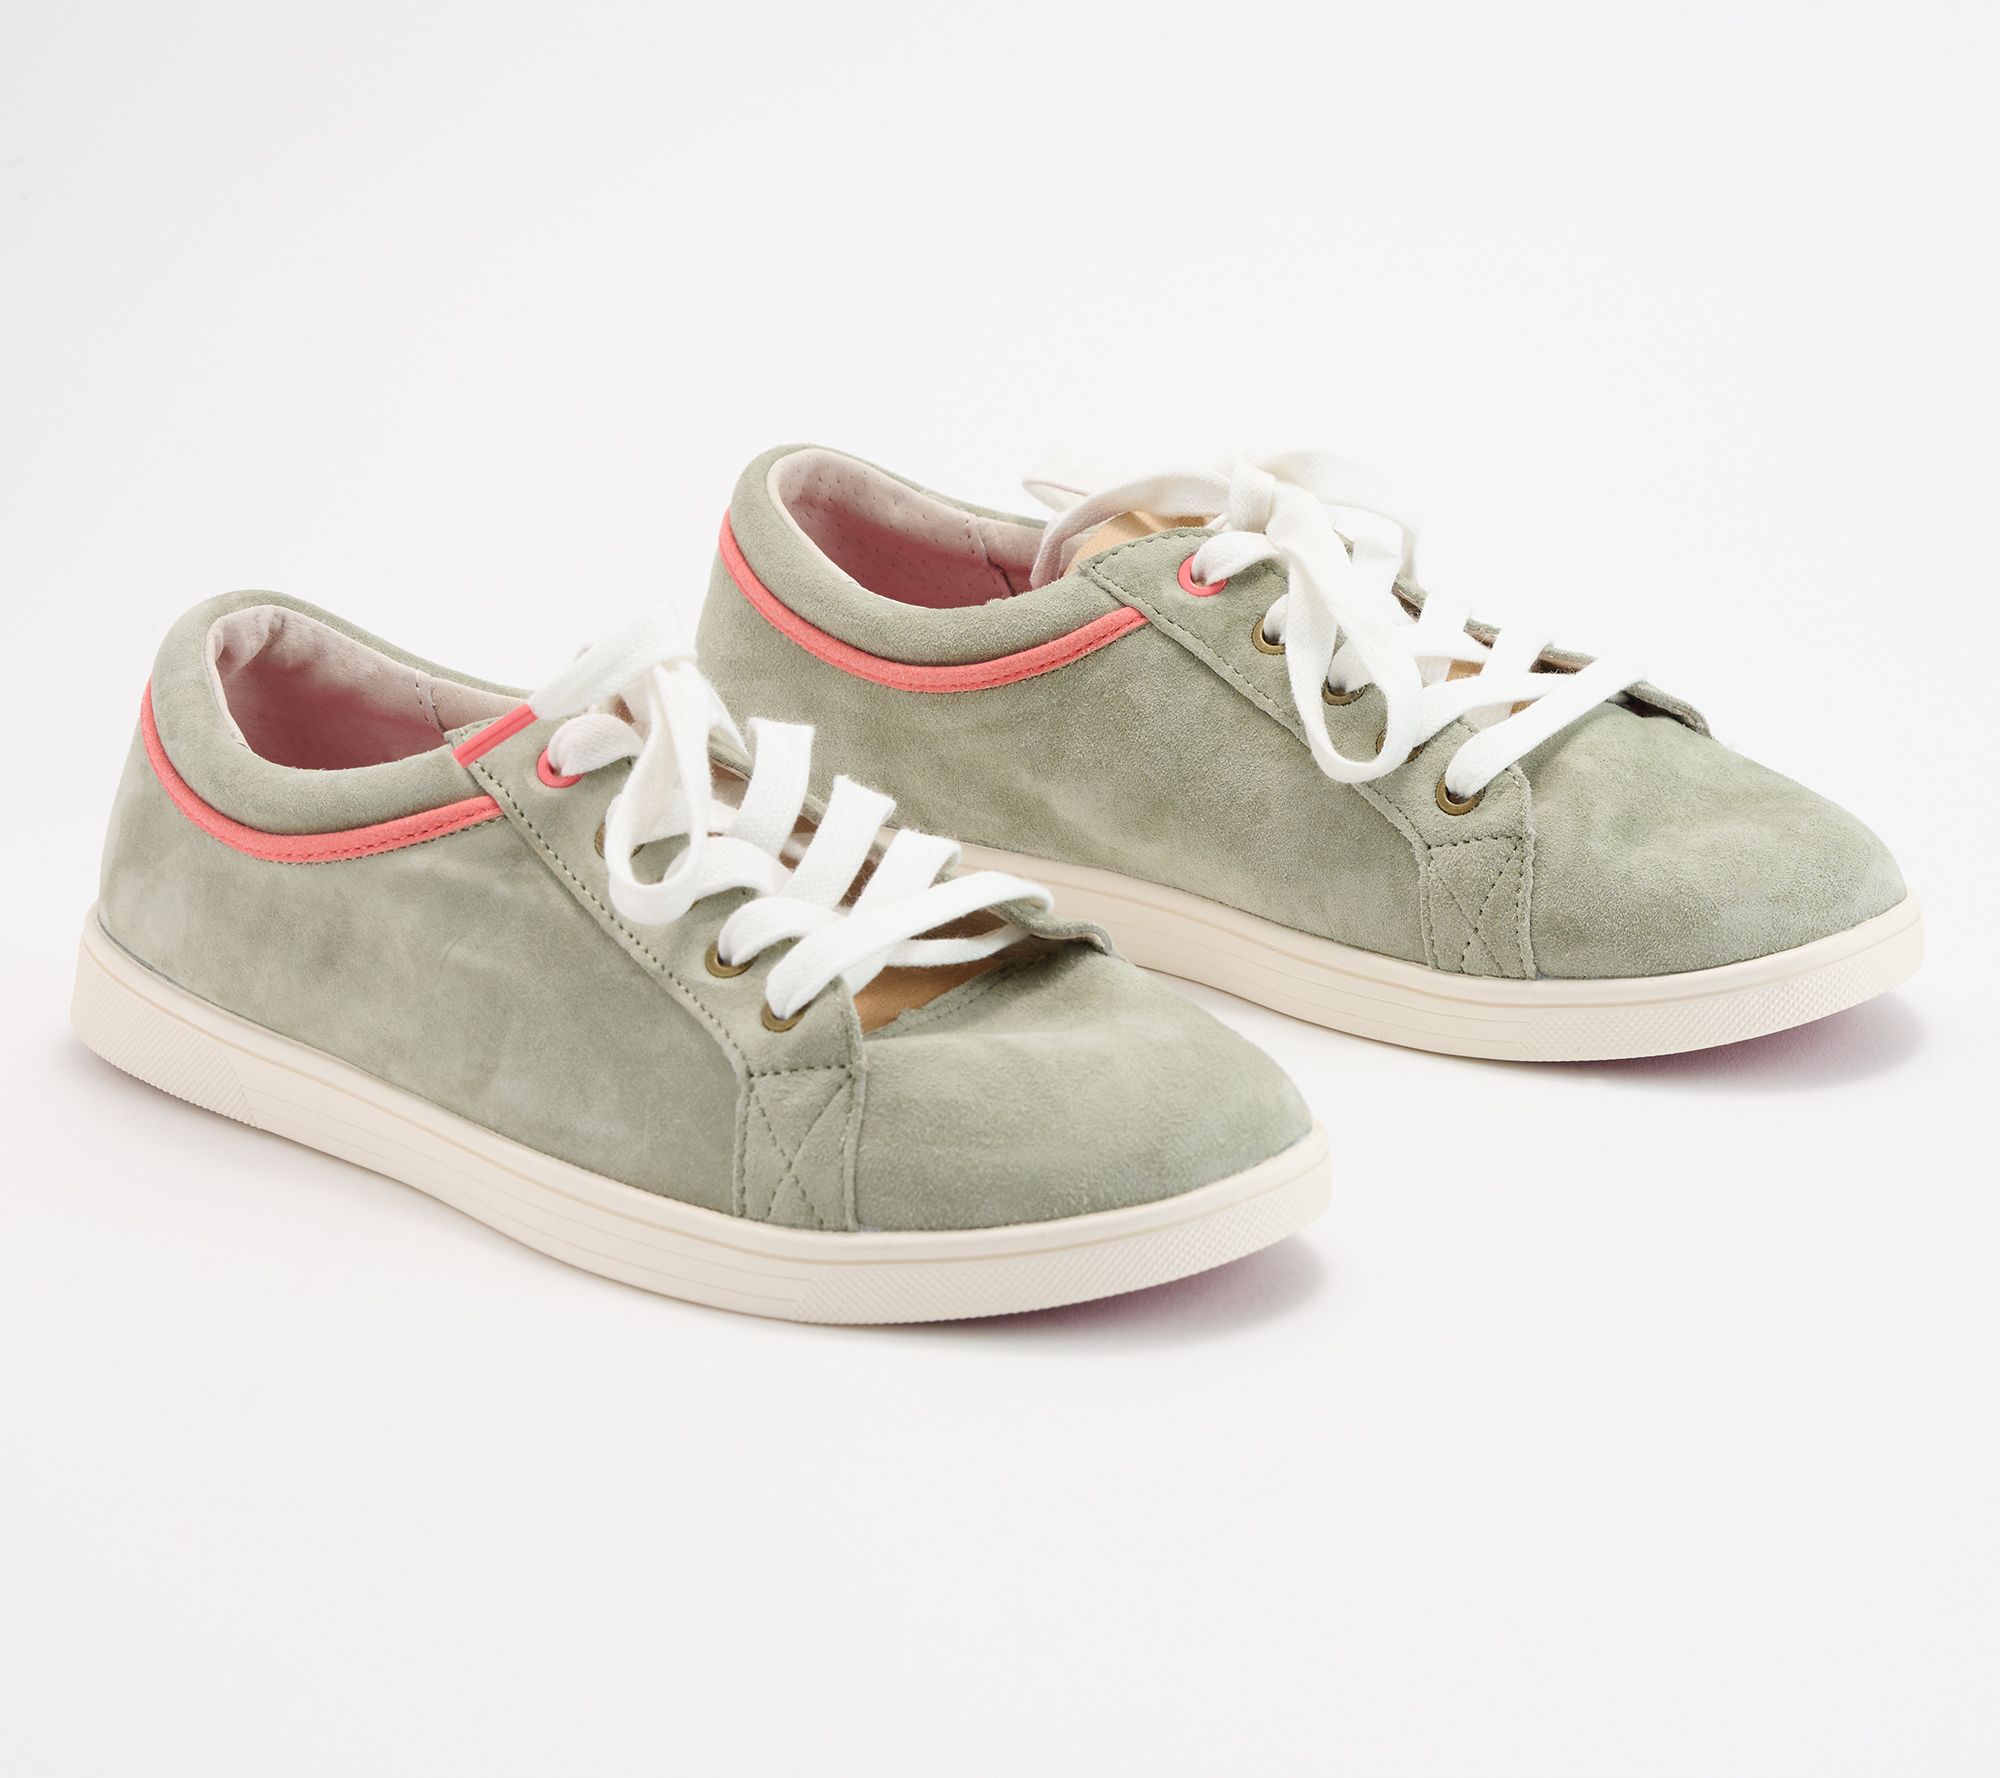 Revitalign Orthotic Suede Casual Sneakers - Avalon Sunny - QVC.com